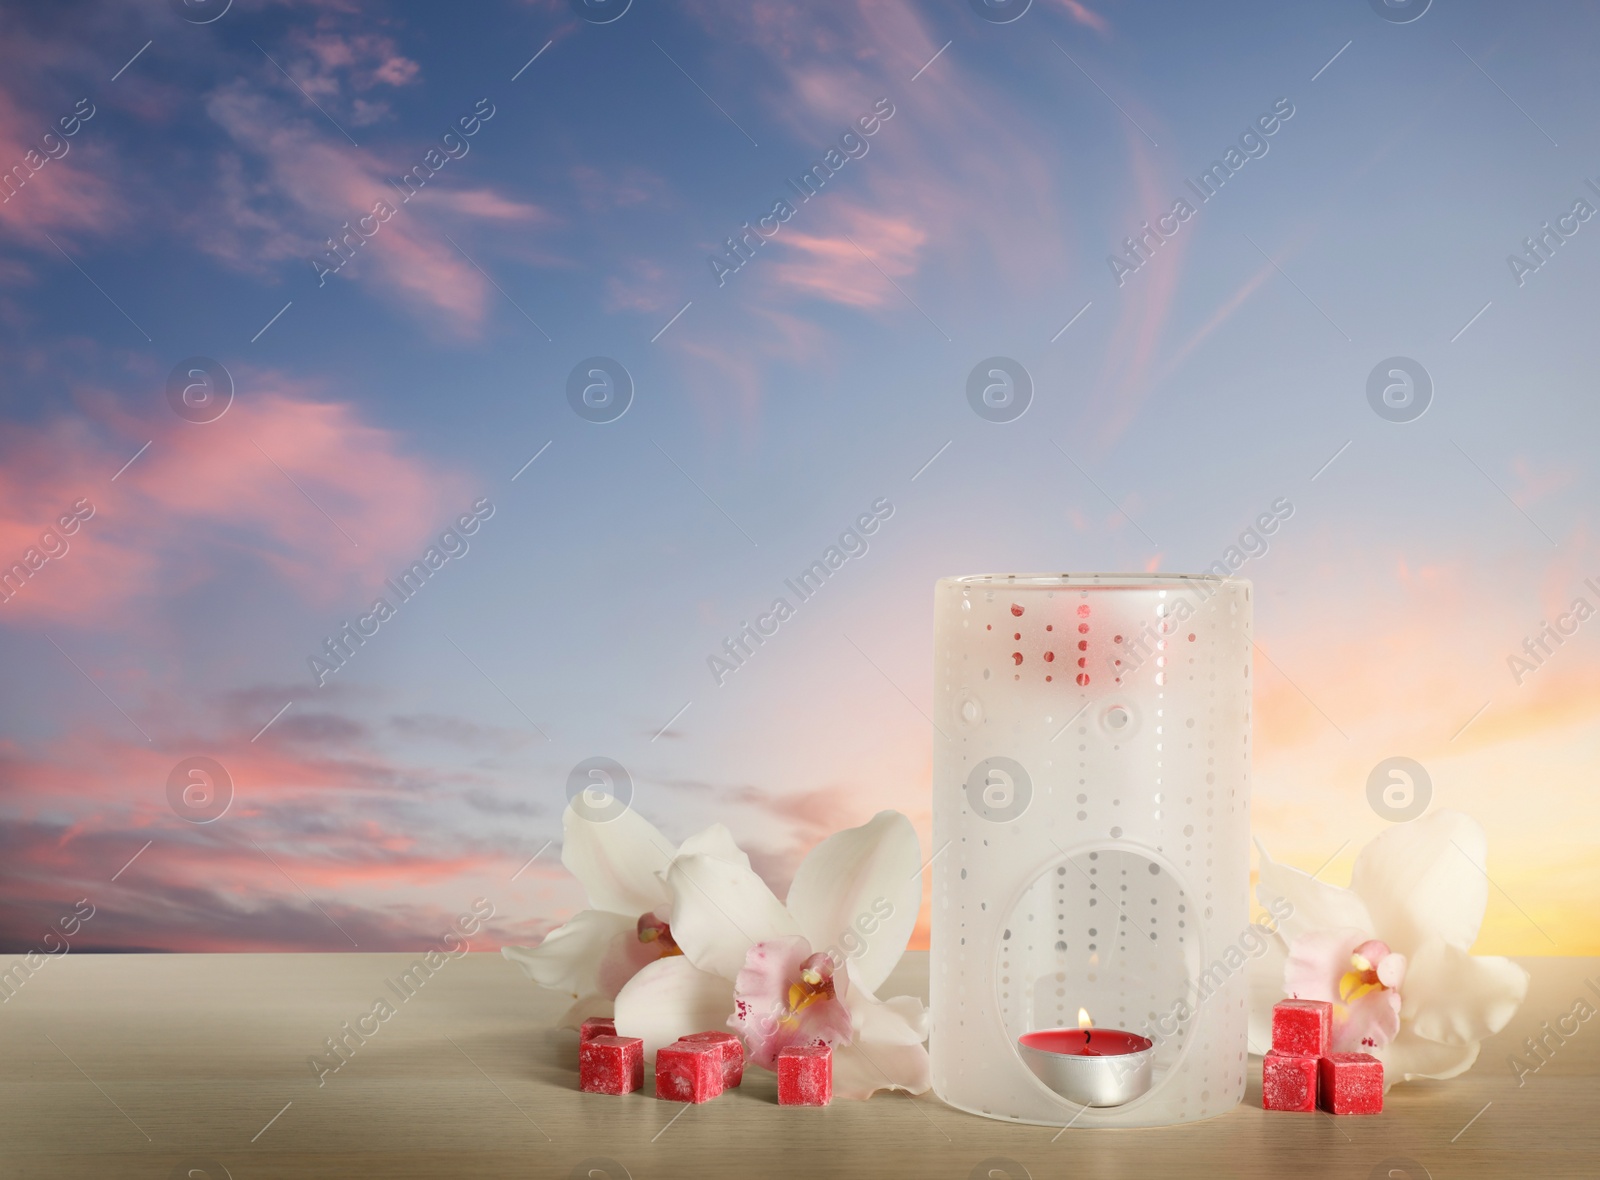 Image of Composition with aroma lamp on wooden table outdoors at sunset, space for text